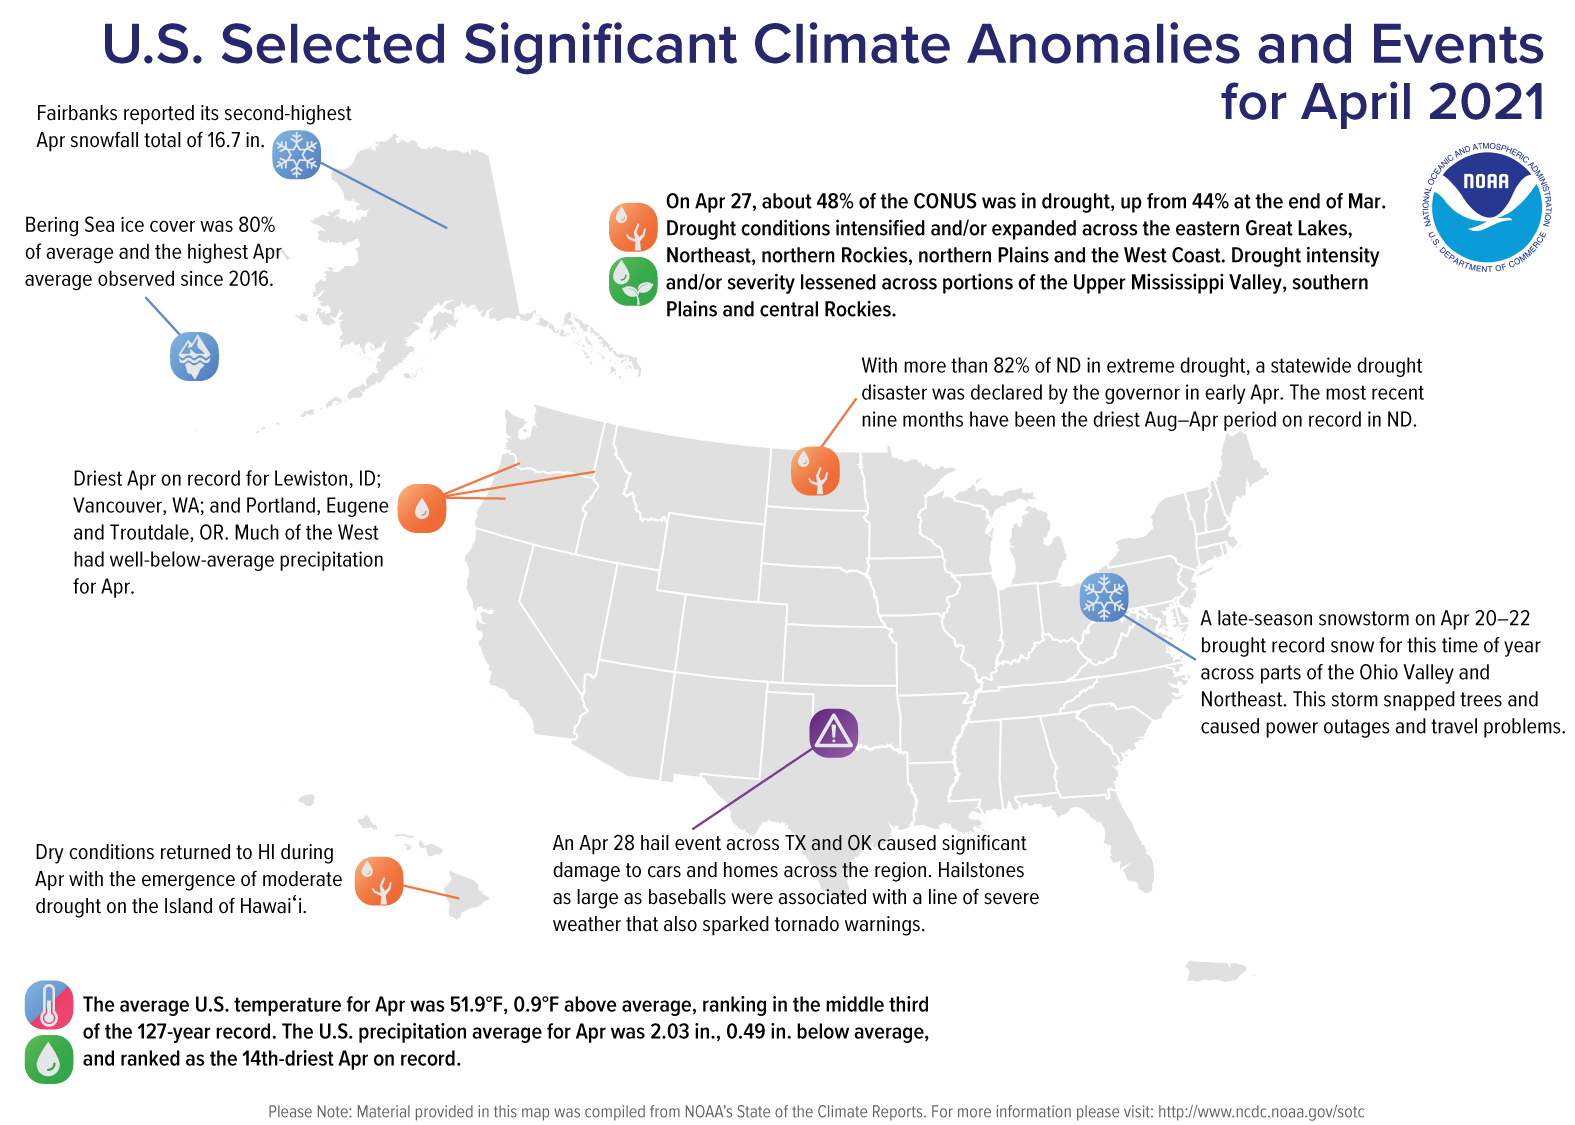 A map of the United States plotted with significant climate events that occurred during April 2021. 